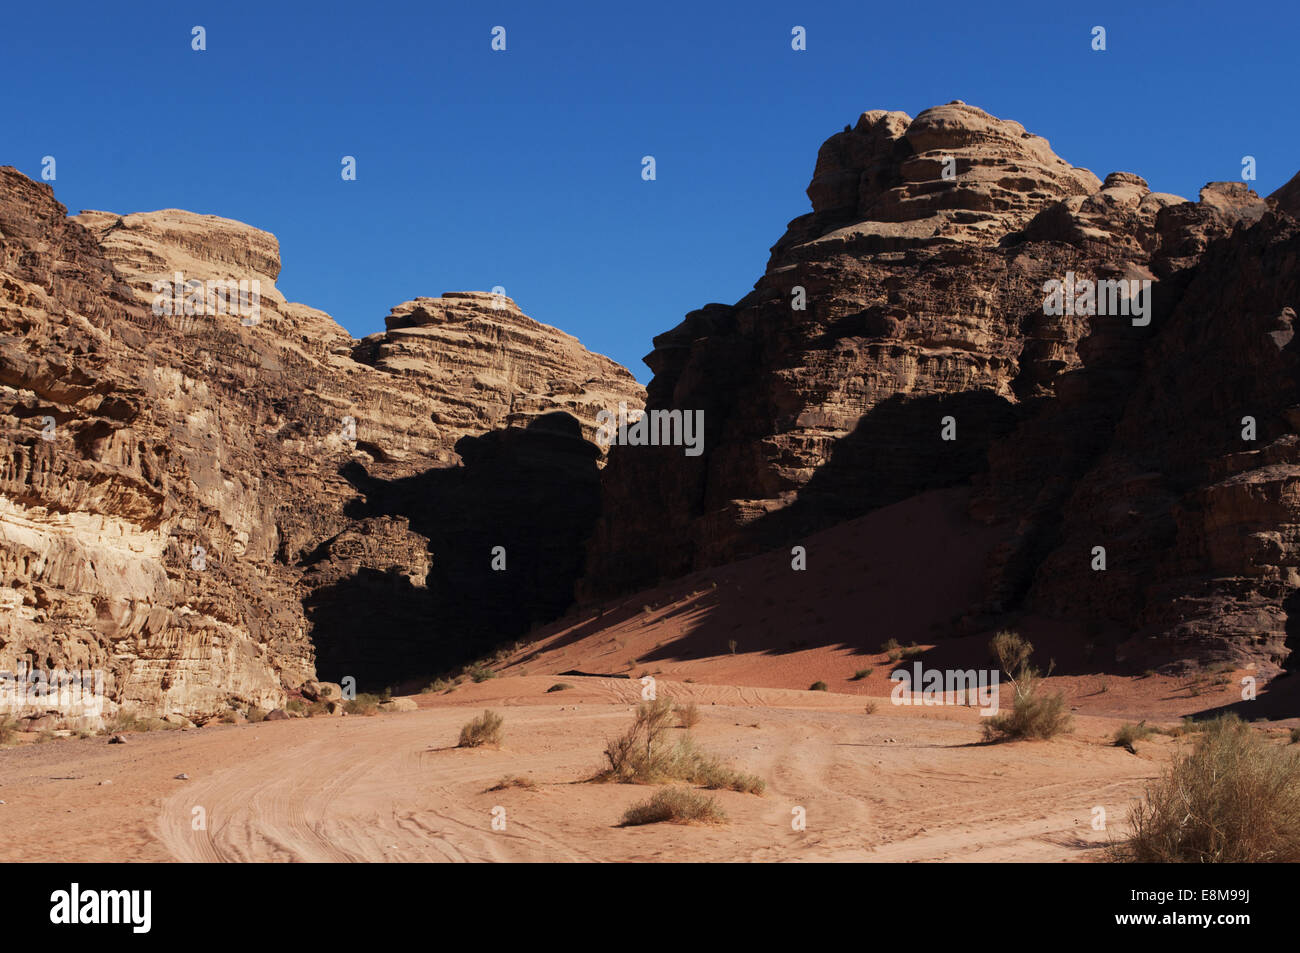 Rocks in the desert of the Wadi Rum, known as Valley of the Moon, a famous worldwide valley cut into sandstone and granite rock, looking like Mars Stock Photo